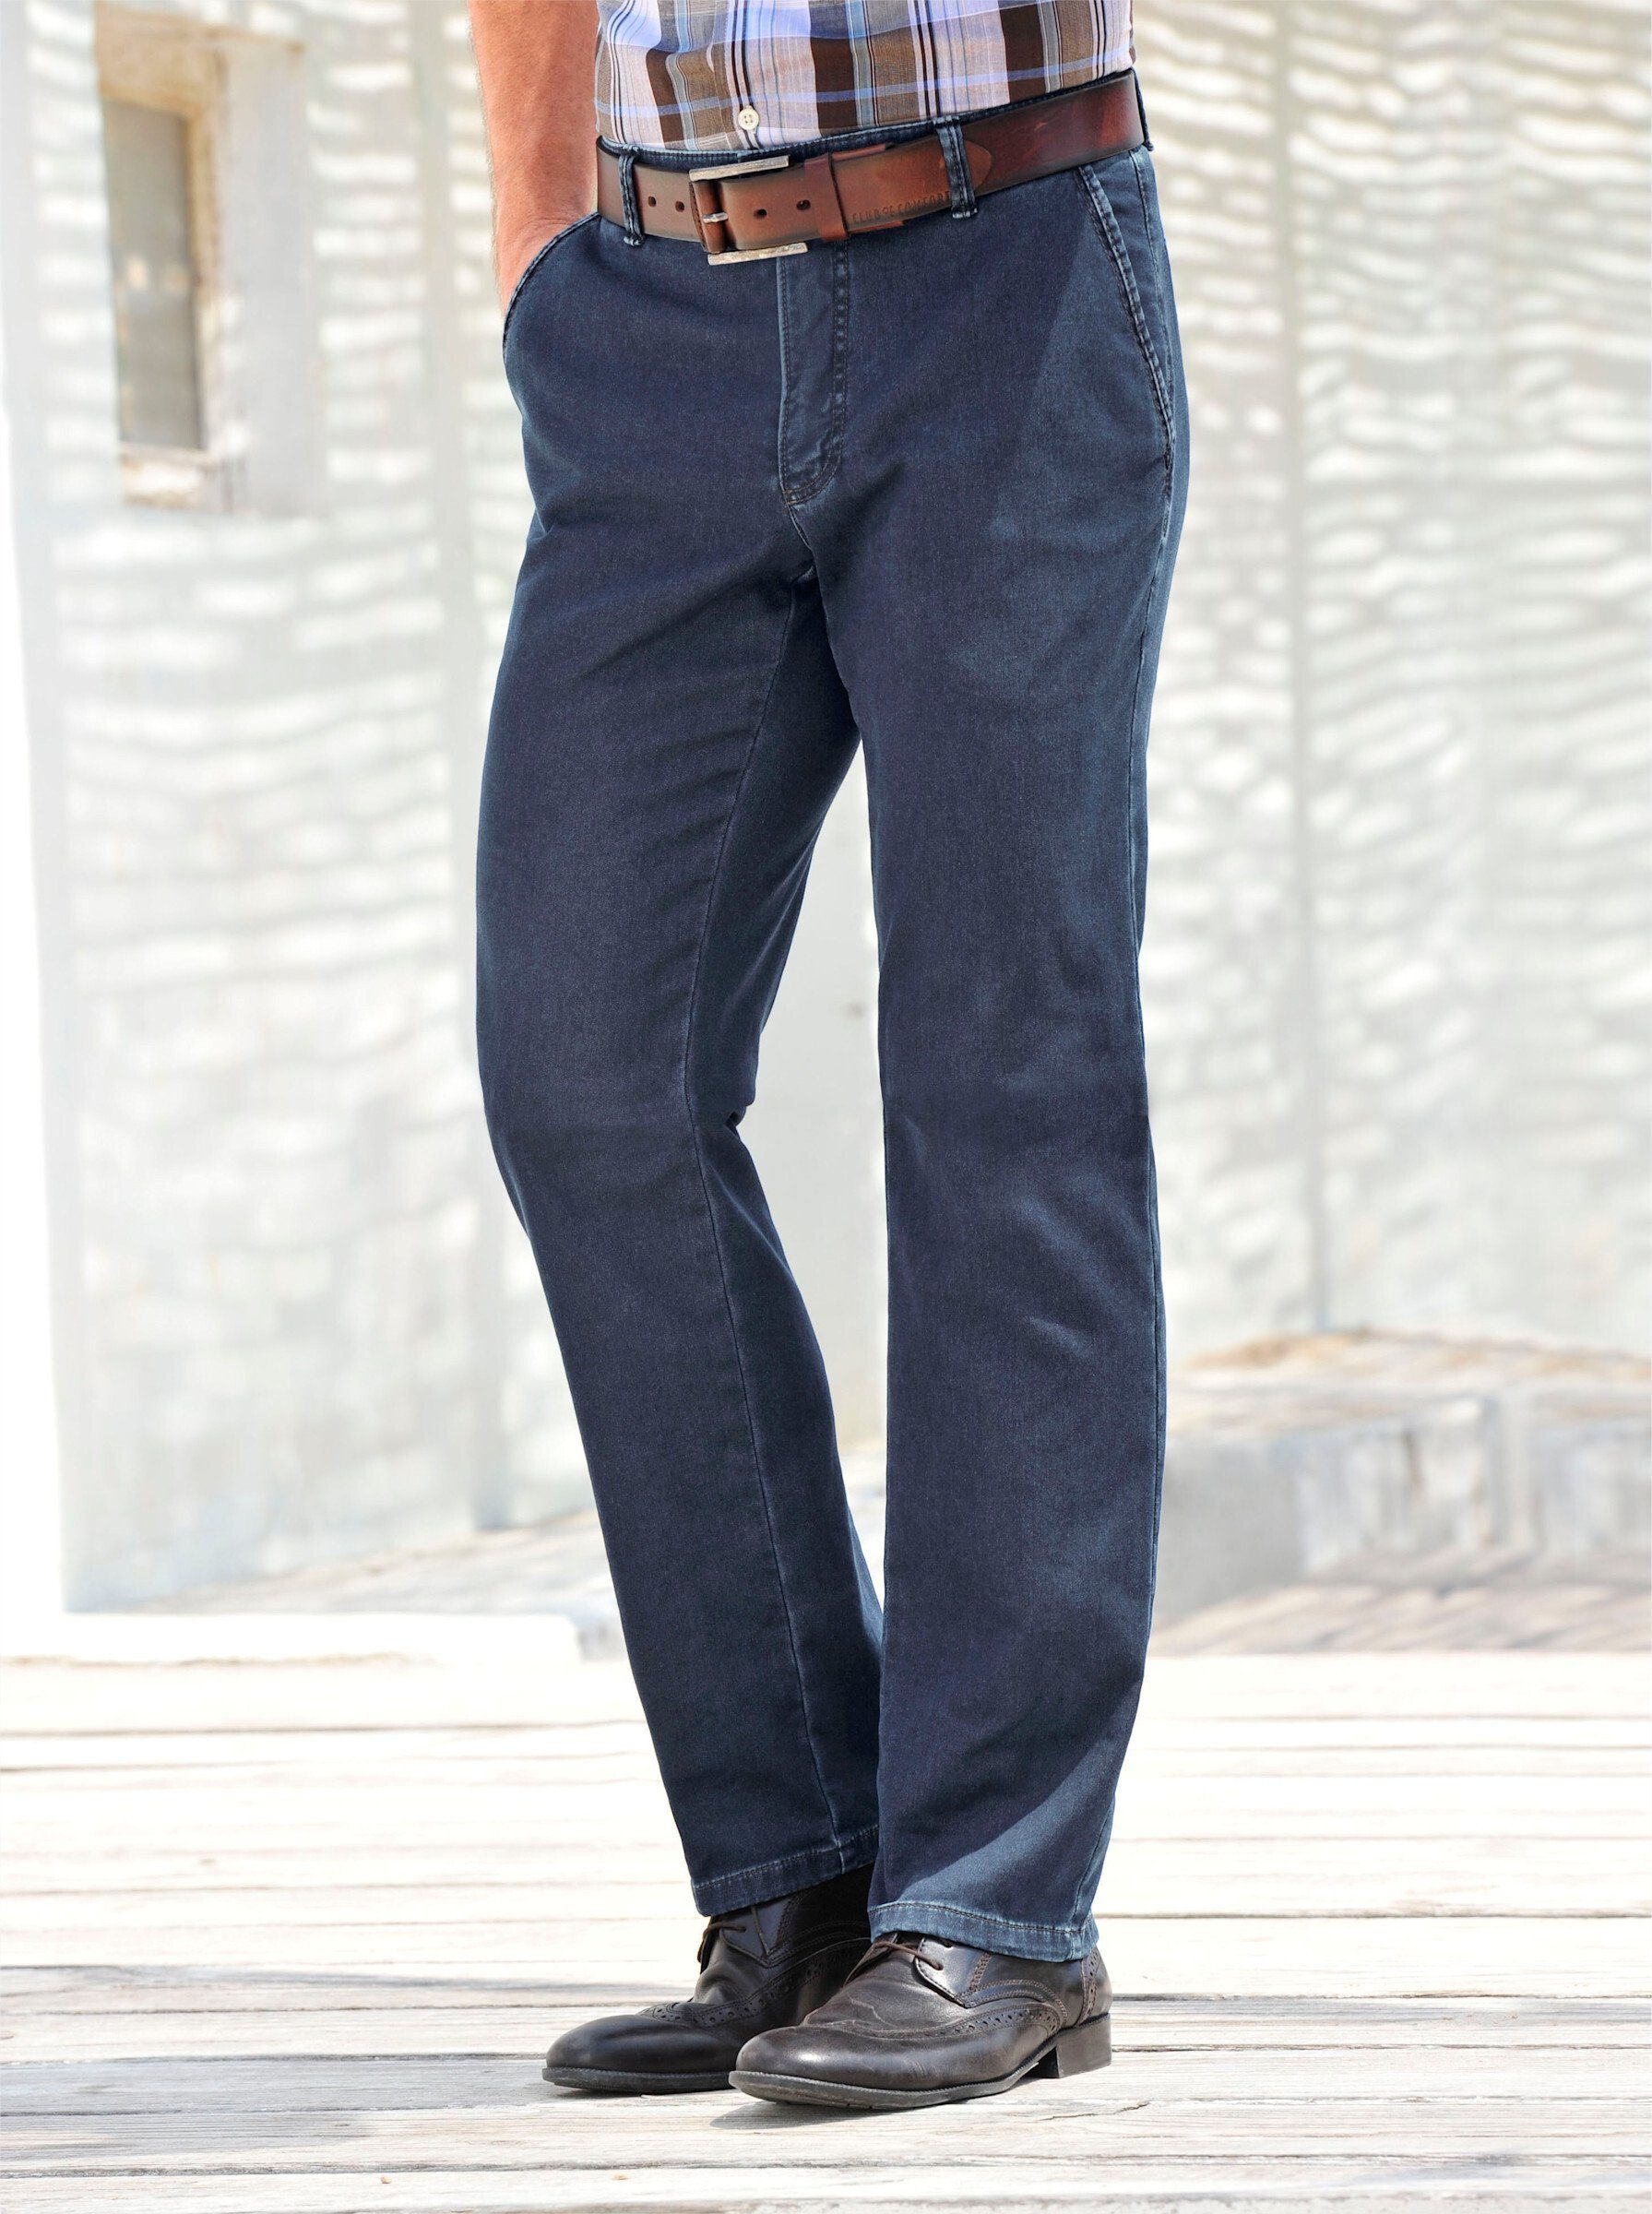 Bequeme Club of Comfort Jeans